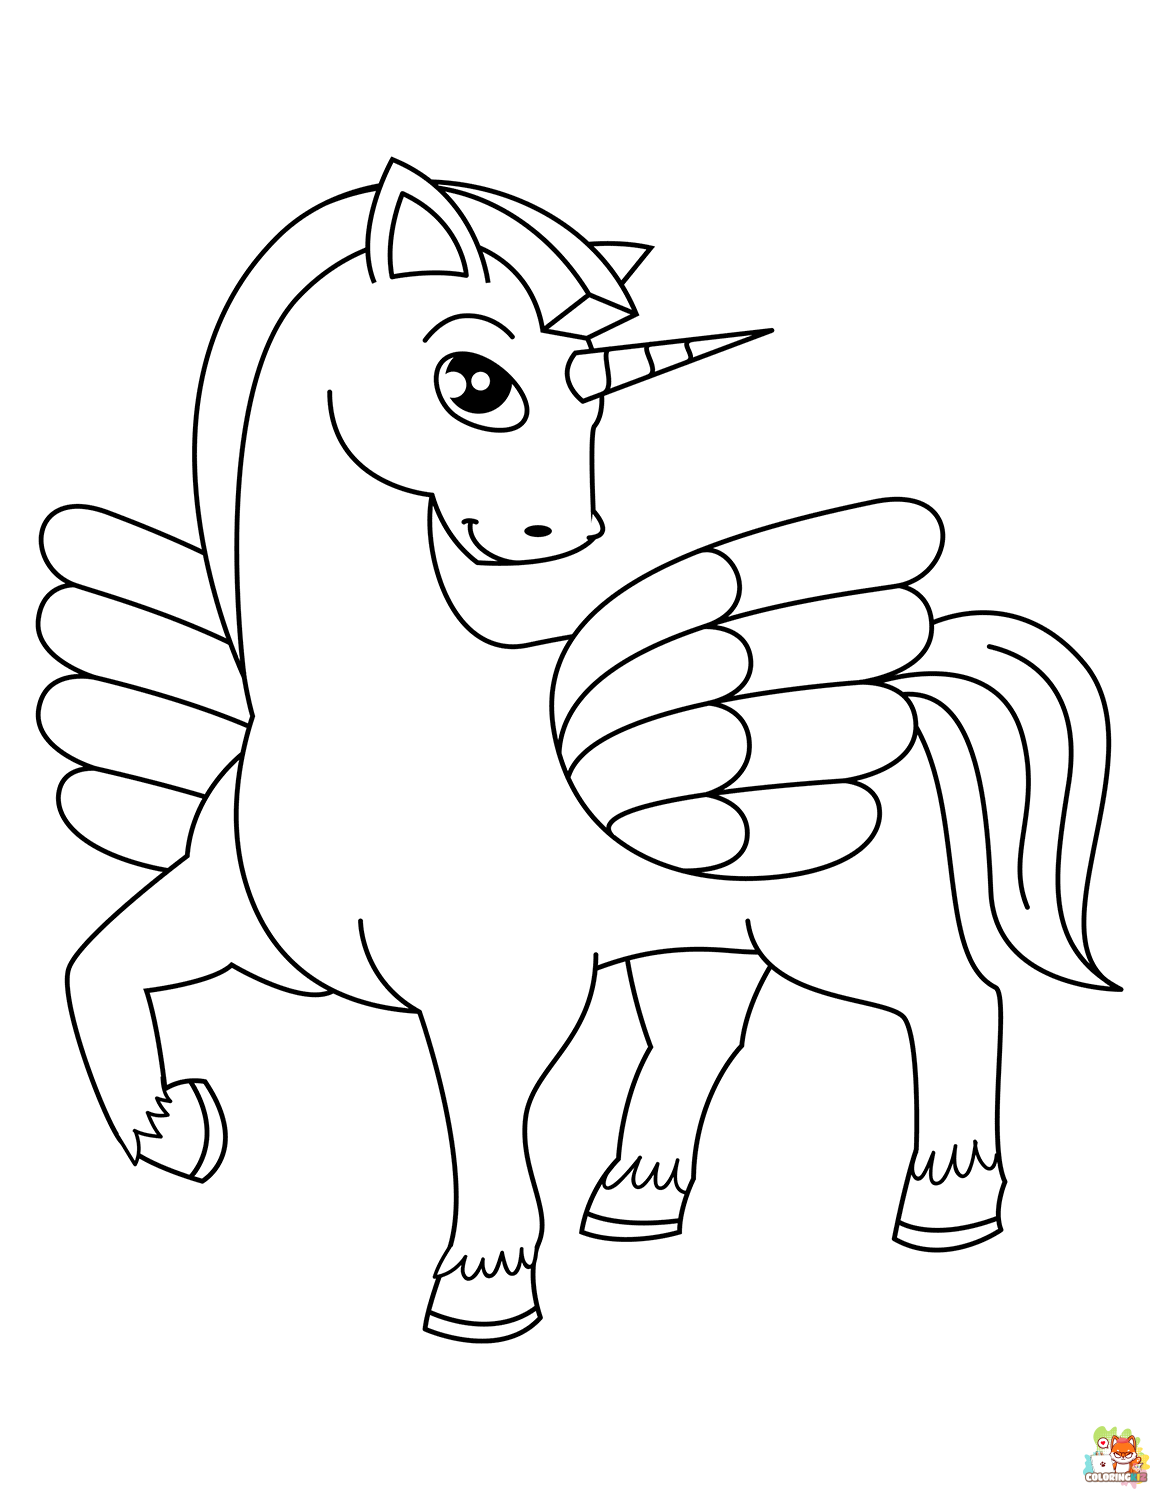 Winged Unicorn Coloring Pages 2